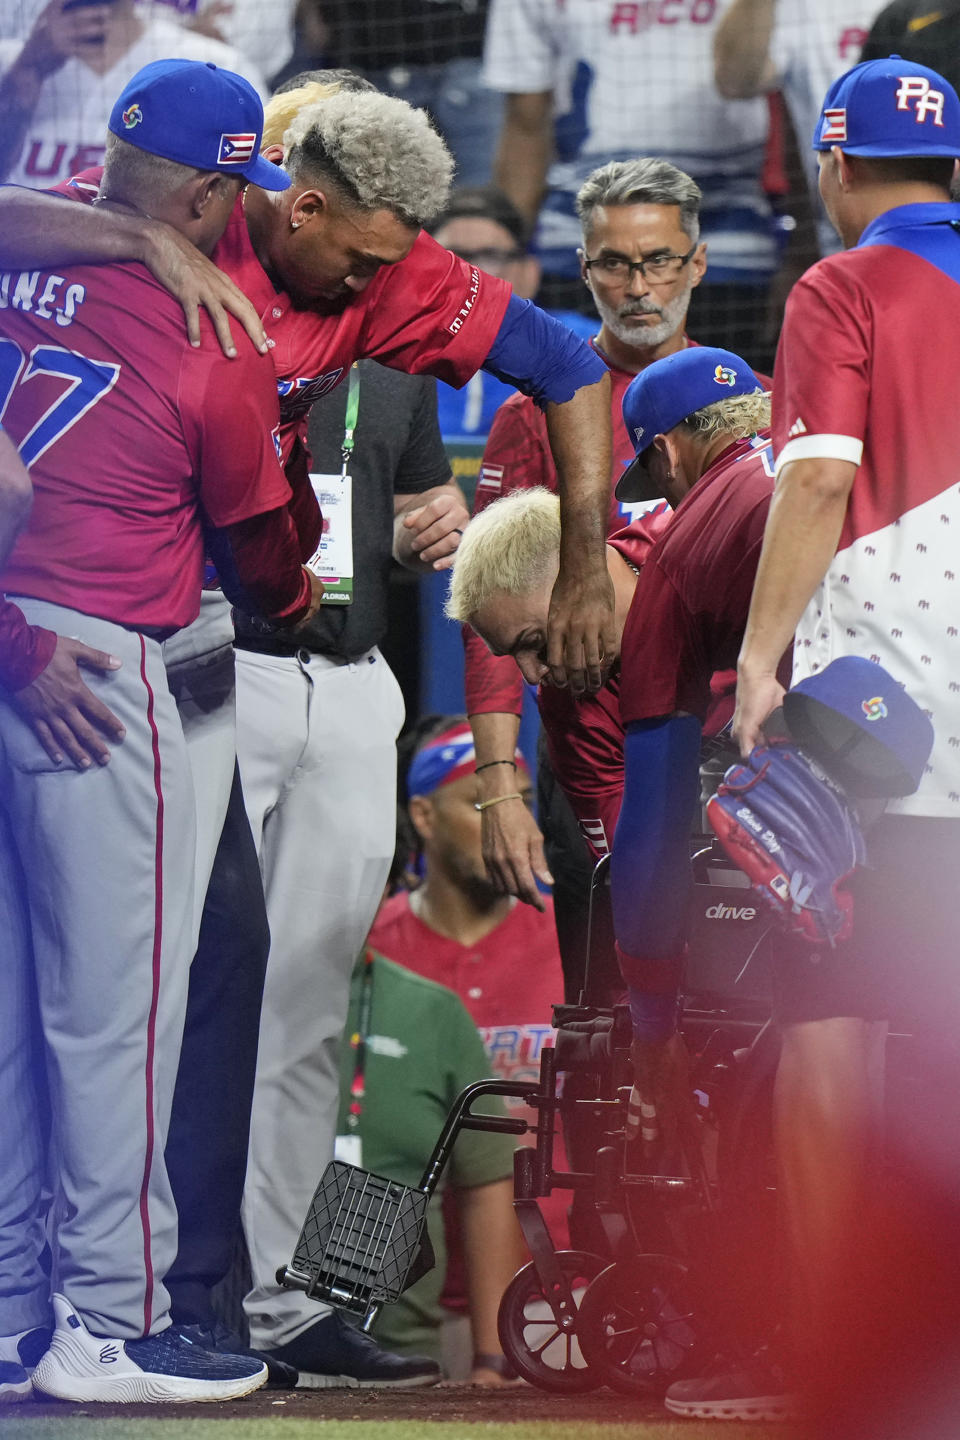 Puerto Rico pitcher Edwin Diaz is helped into a wheelchair after he appeared to injure himself during postgame celebration after Puerto Rico beat the Dominican Republic 5-2 during a World Baseball Classic game, Wednesday, March 15, 2023, in Miami. (AP Photo/Wilfredo Lee)